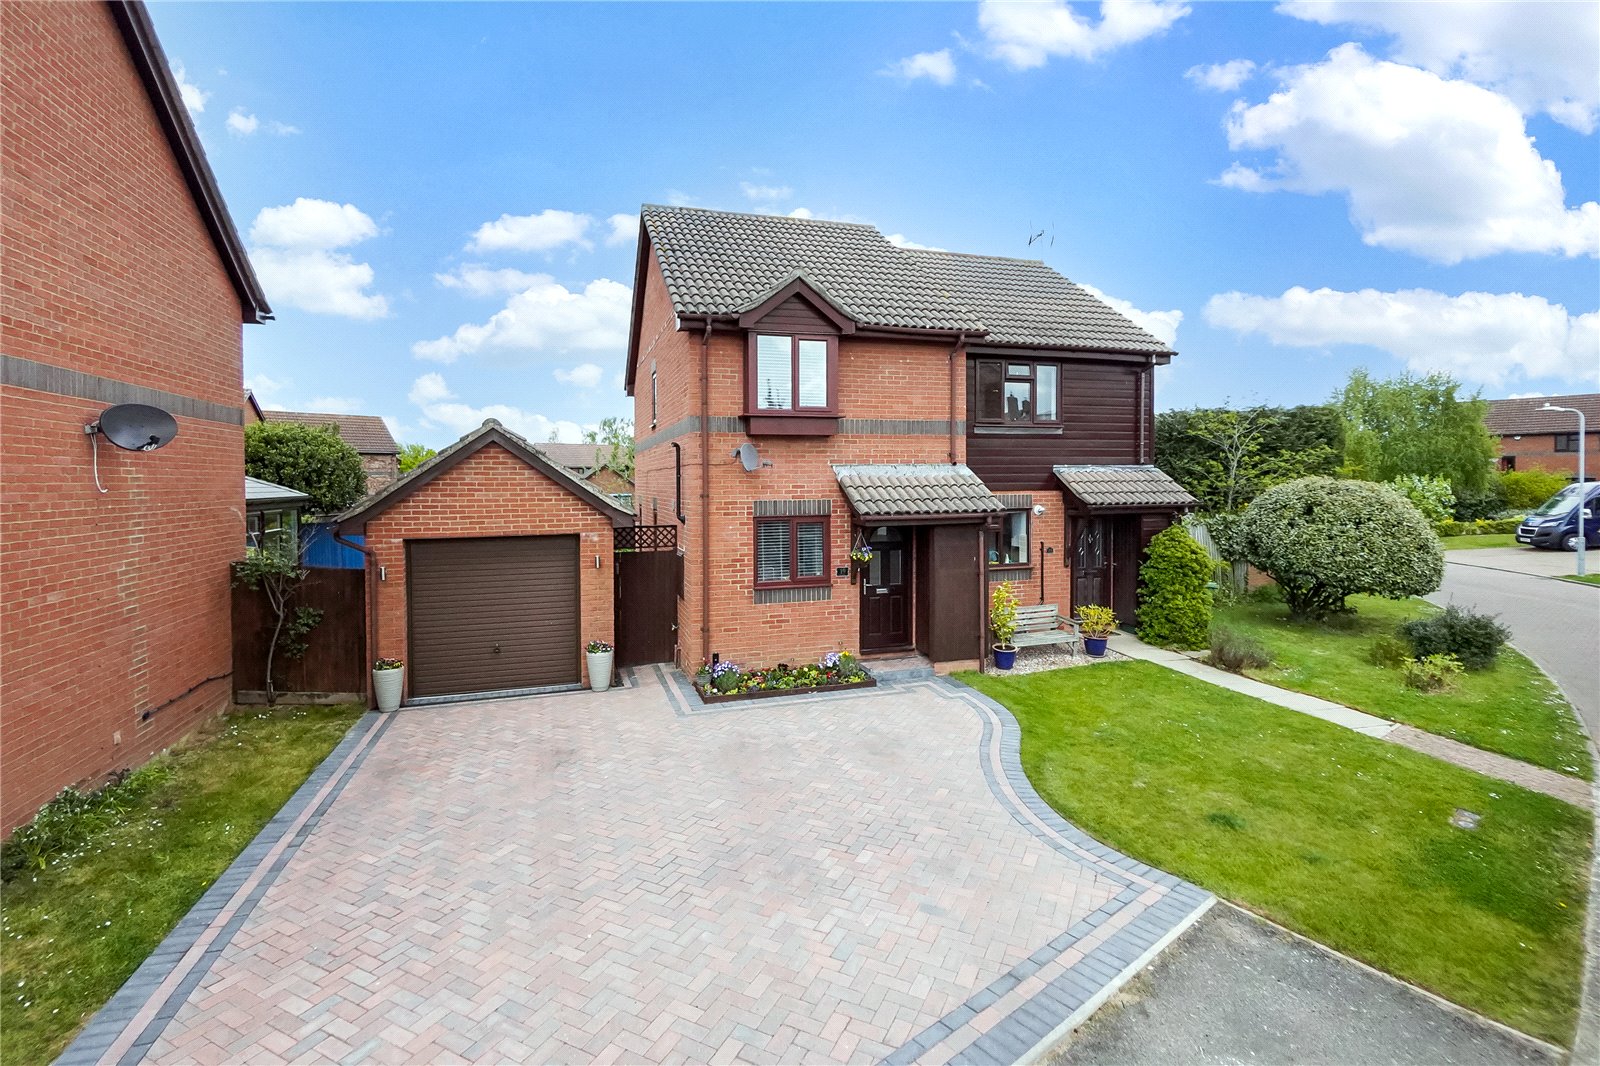 2 bed house for sale in Kiln Way, Paddock Wood, TN12